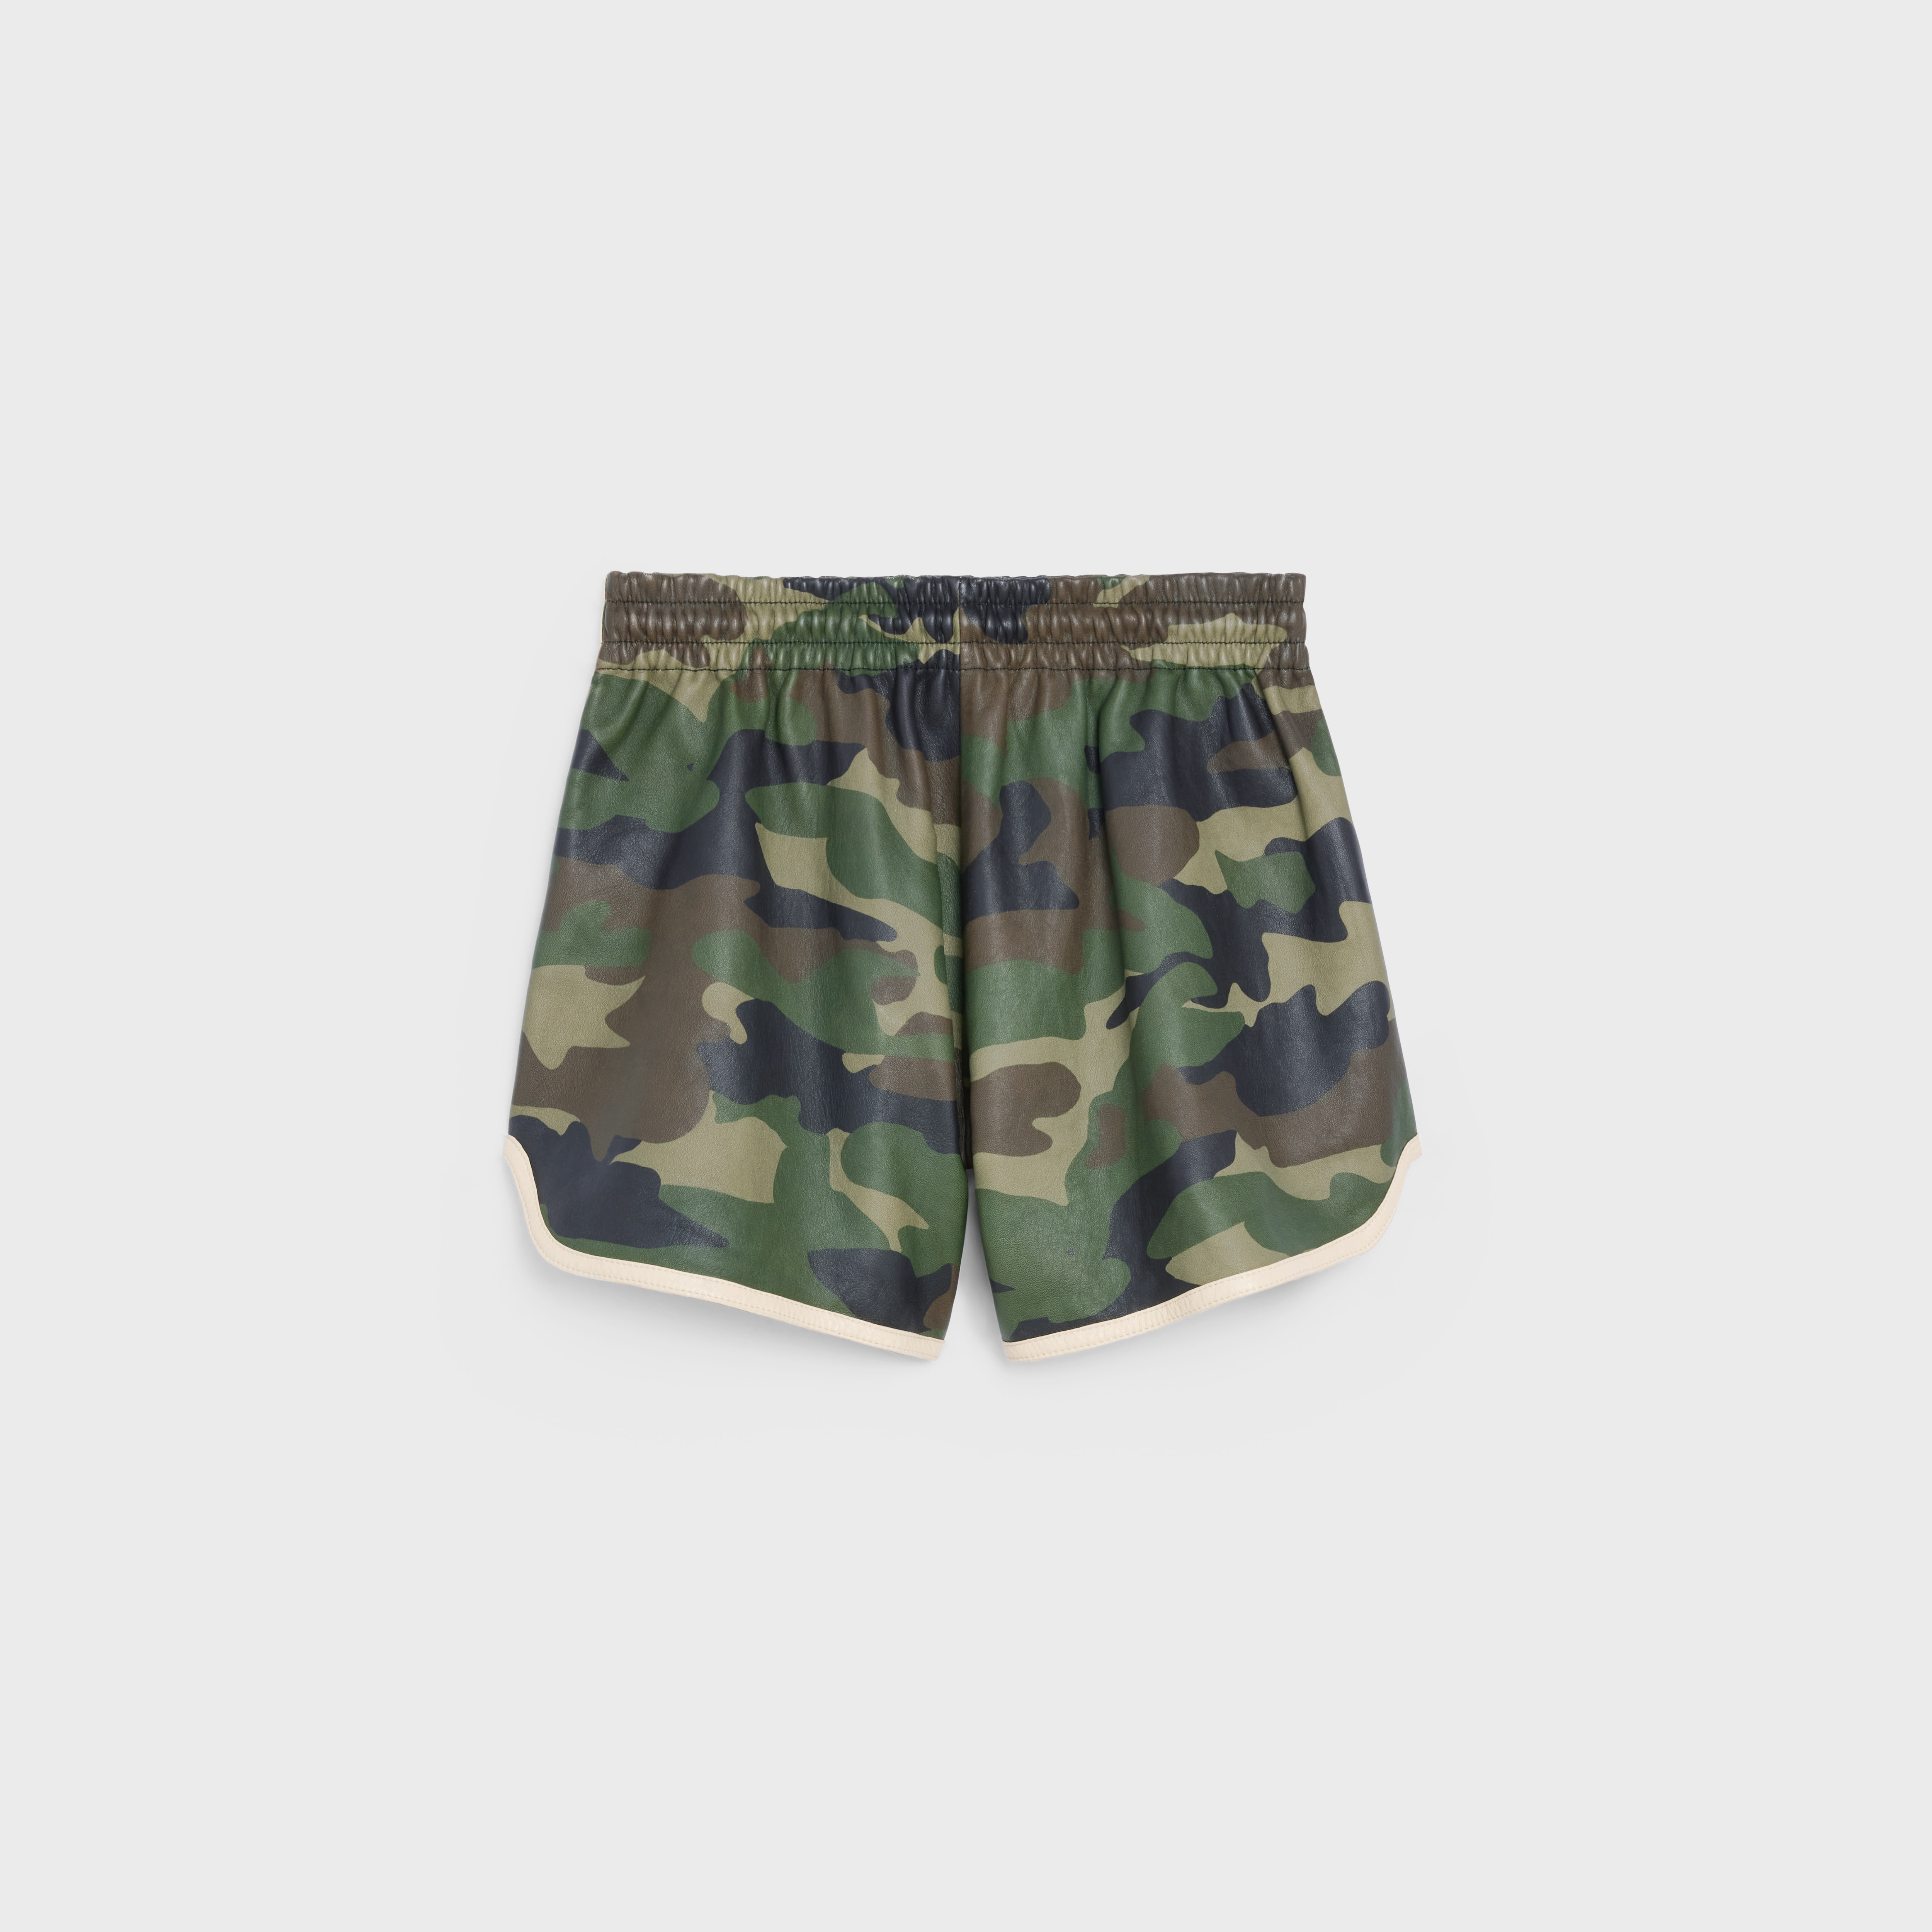 CROPPED ATHLETIC SHORTS IN CAMO - 2